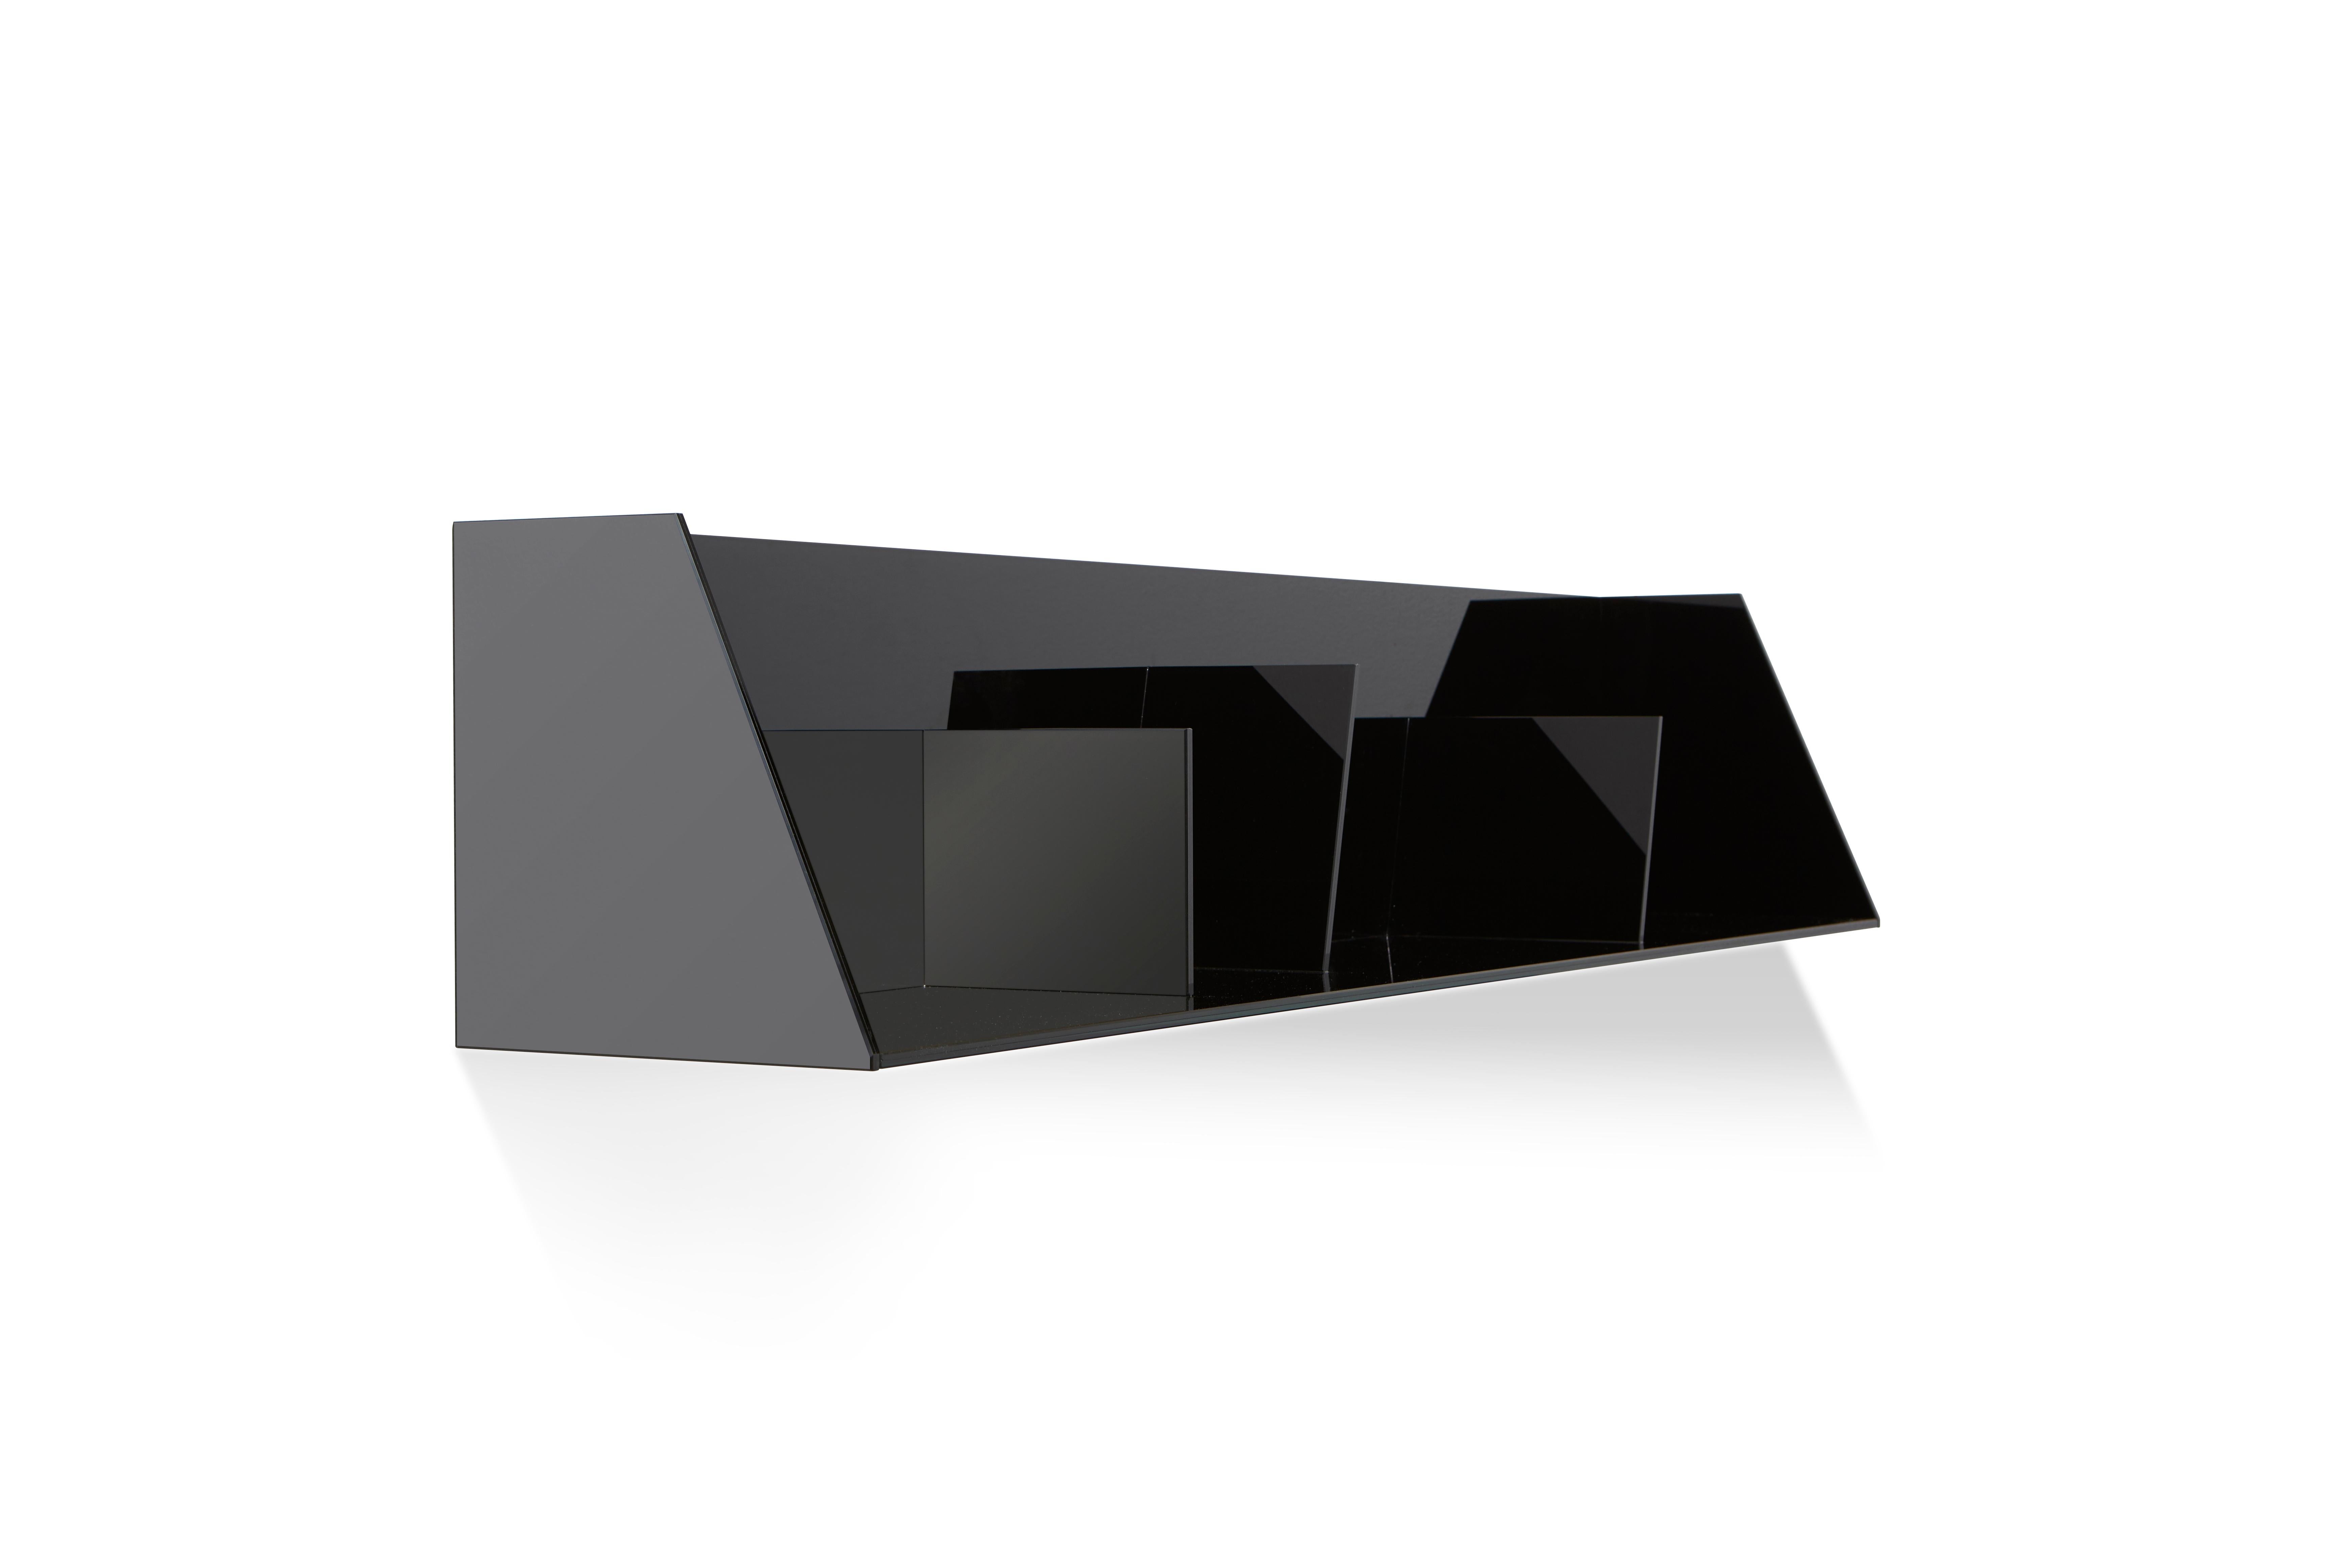 Corbel shelf by Mentemano
Dimensions: 116 x 42 x H 190.5 cm
Materials: tempered glass

Mentemano is a design concept brand leading to a precise matter: is the “mente” (mind) leading the “mano” (hand) to create a piece of furniture or instead the